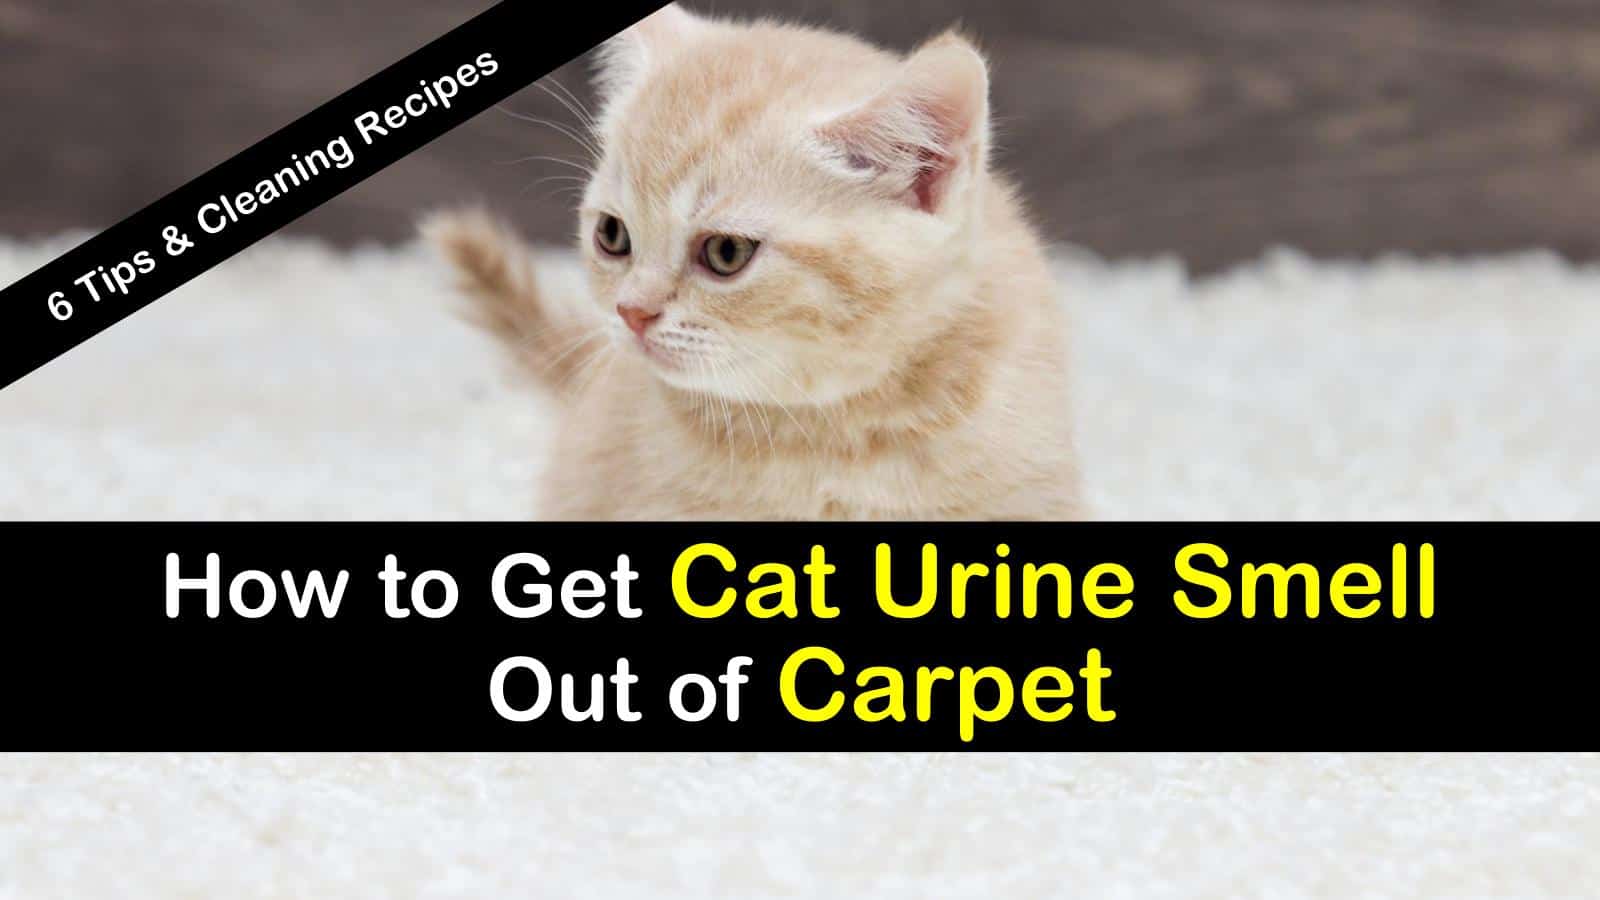 how to get cat urine smell out of carpet titlimg